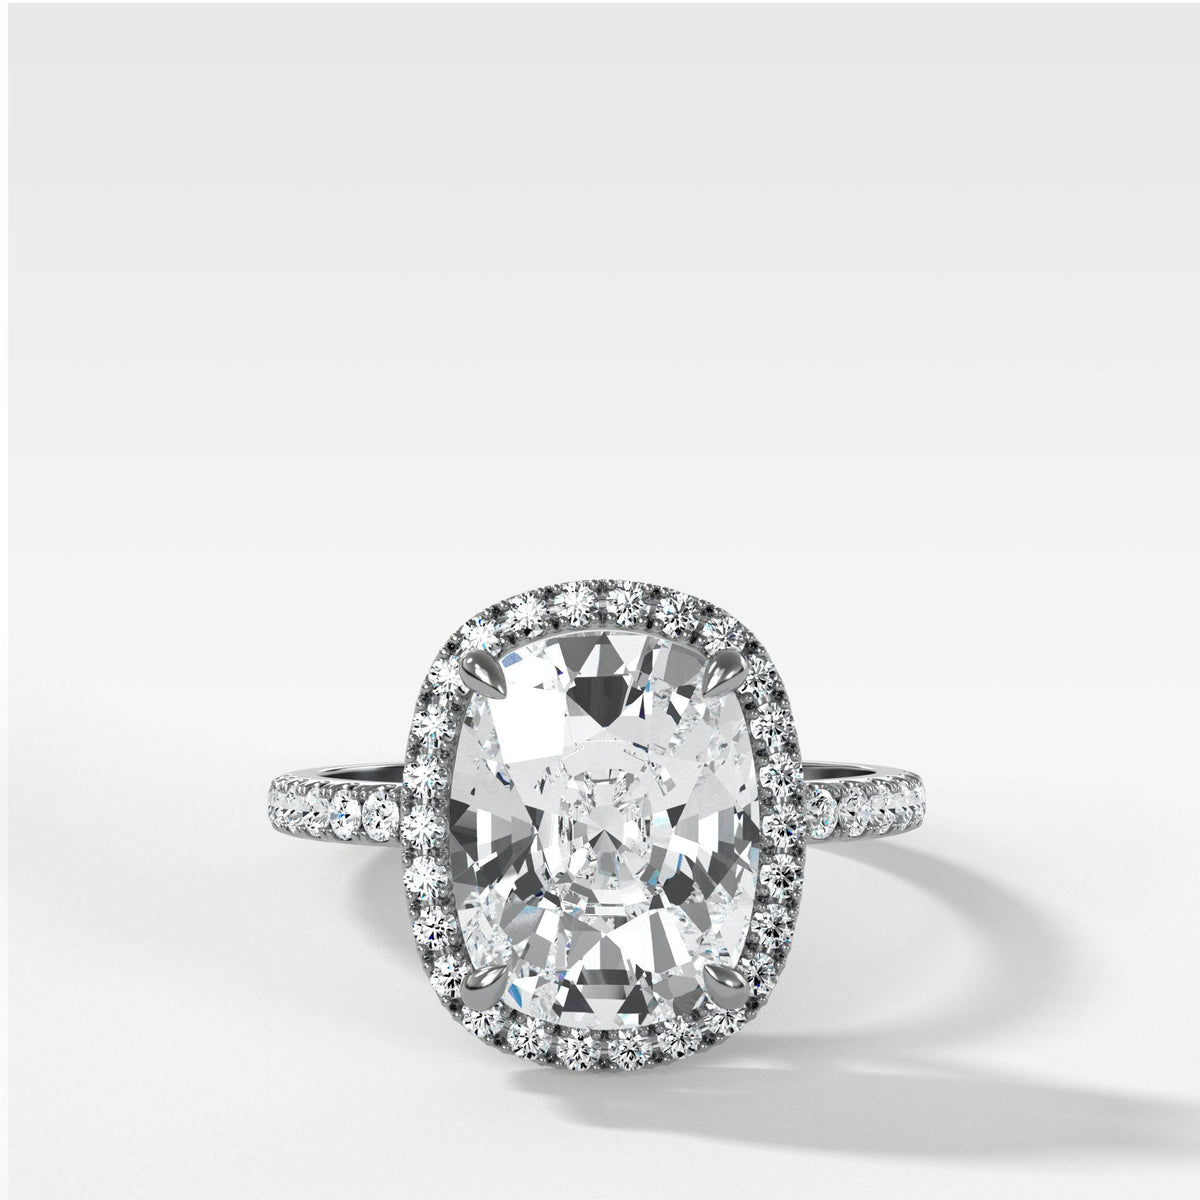 Aurora Pave Halo Ring With Elongated Cushion Cut by Good Stone in White Gold